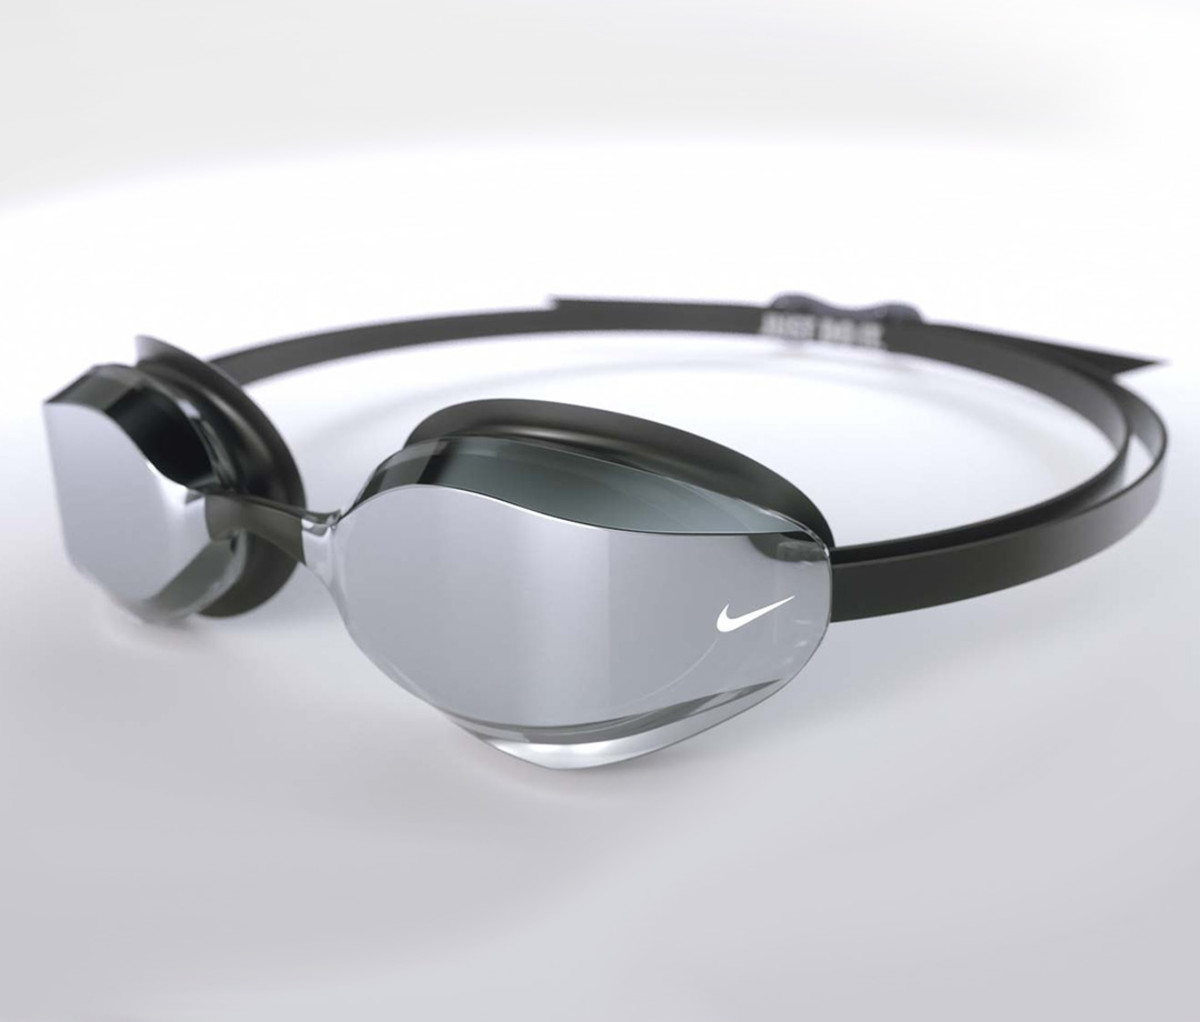 Nike Releases New Vapor Goggles to Make 